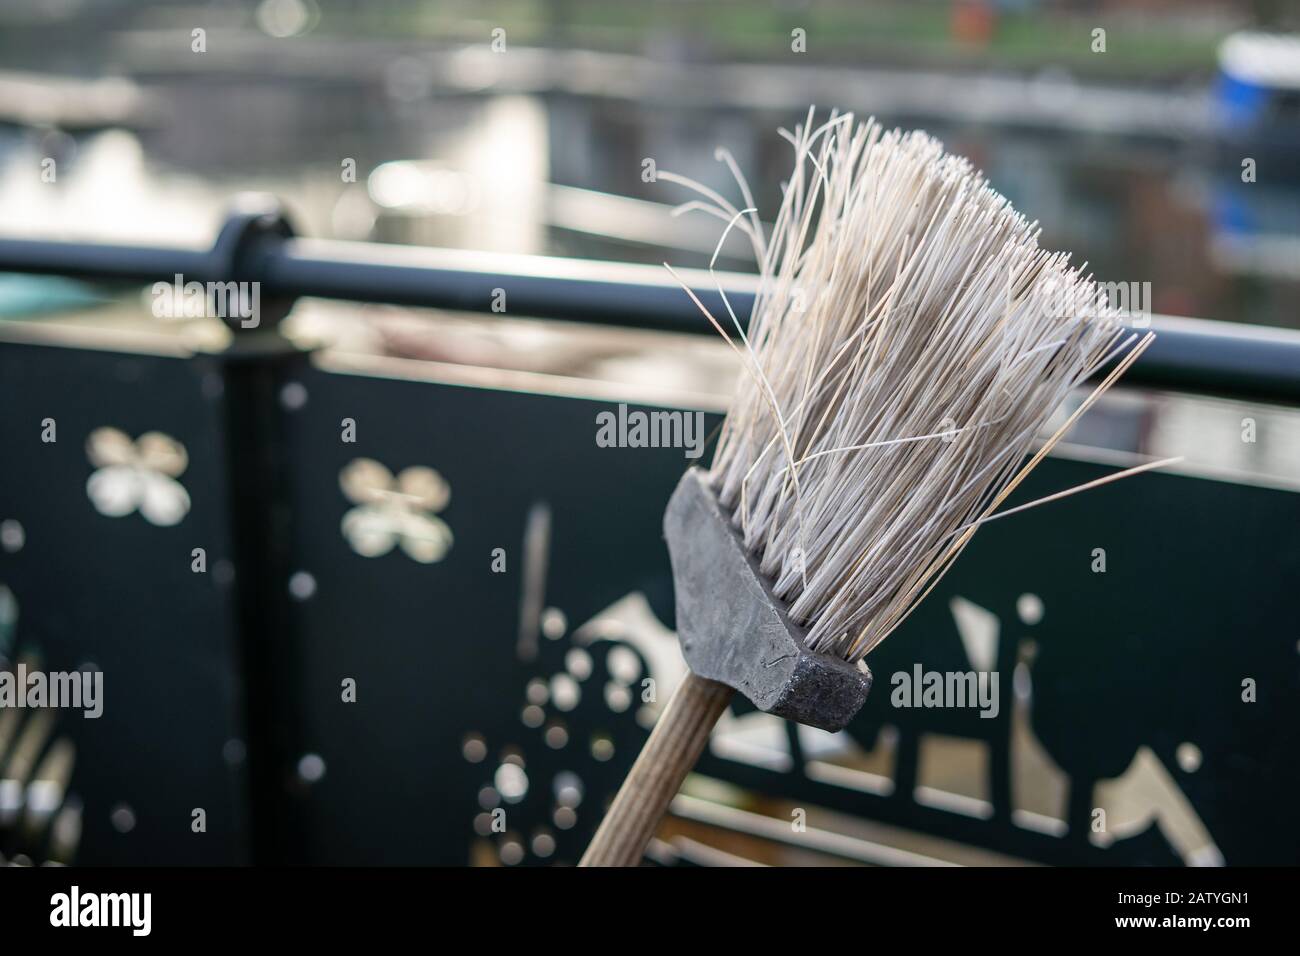 A close up of the head of a road sweepers broom or brush with selective focus on the bristles Stock Photo